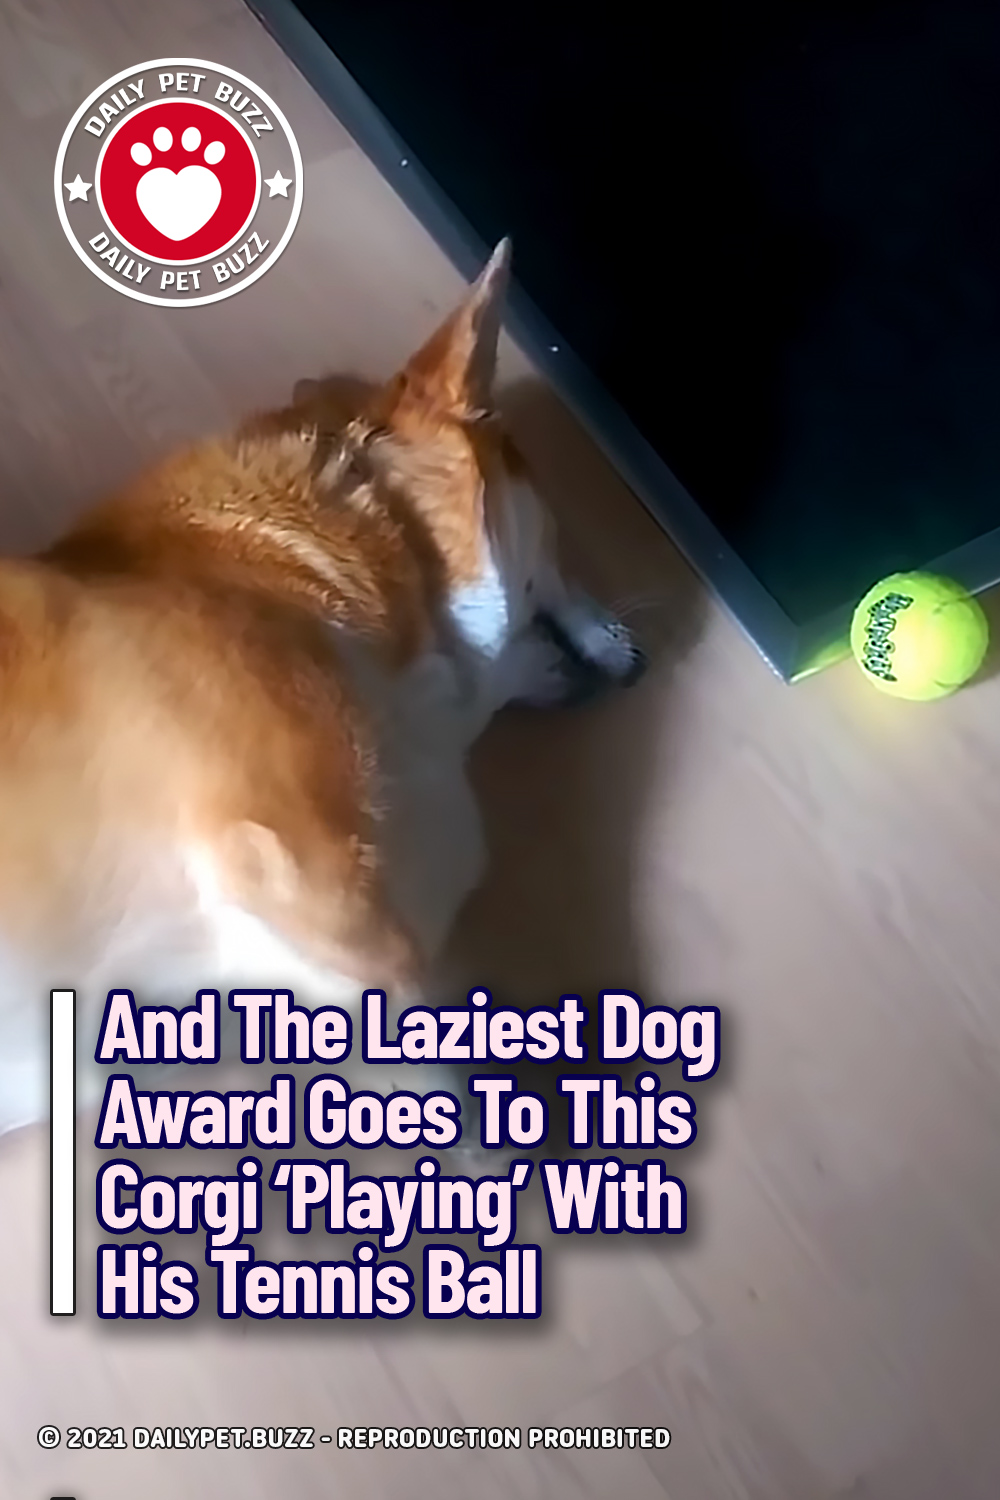 And The Laziest Dog Award Goes To This Corgi \'Playing\' With His Tennis Ball